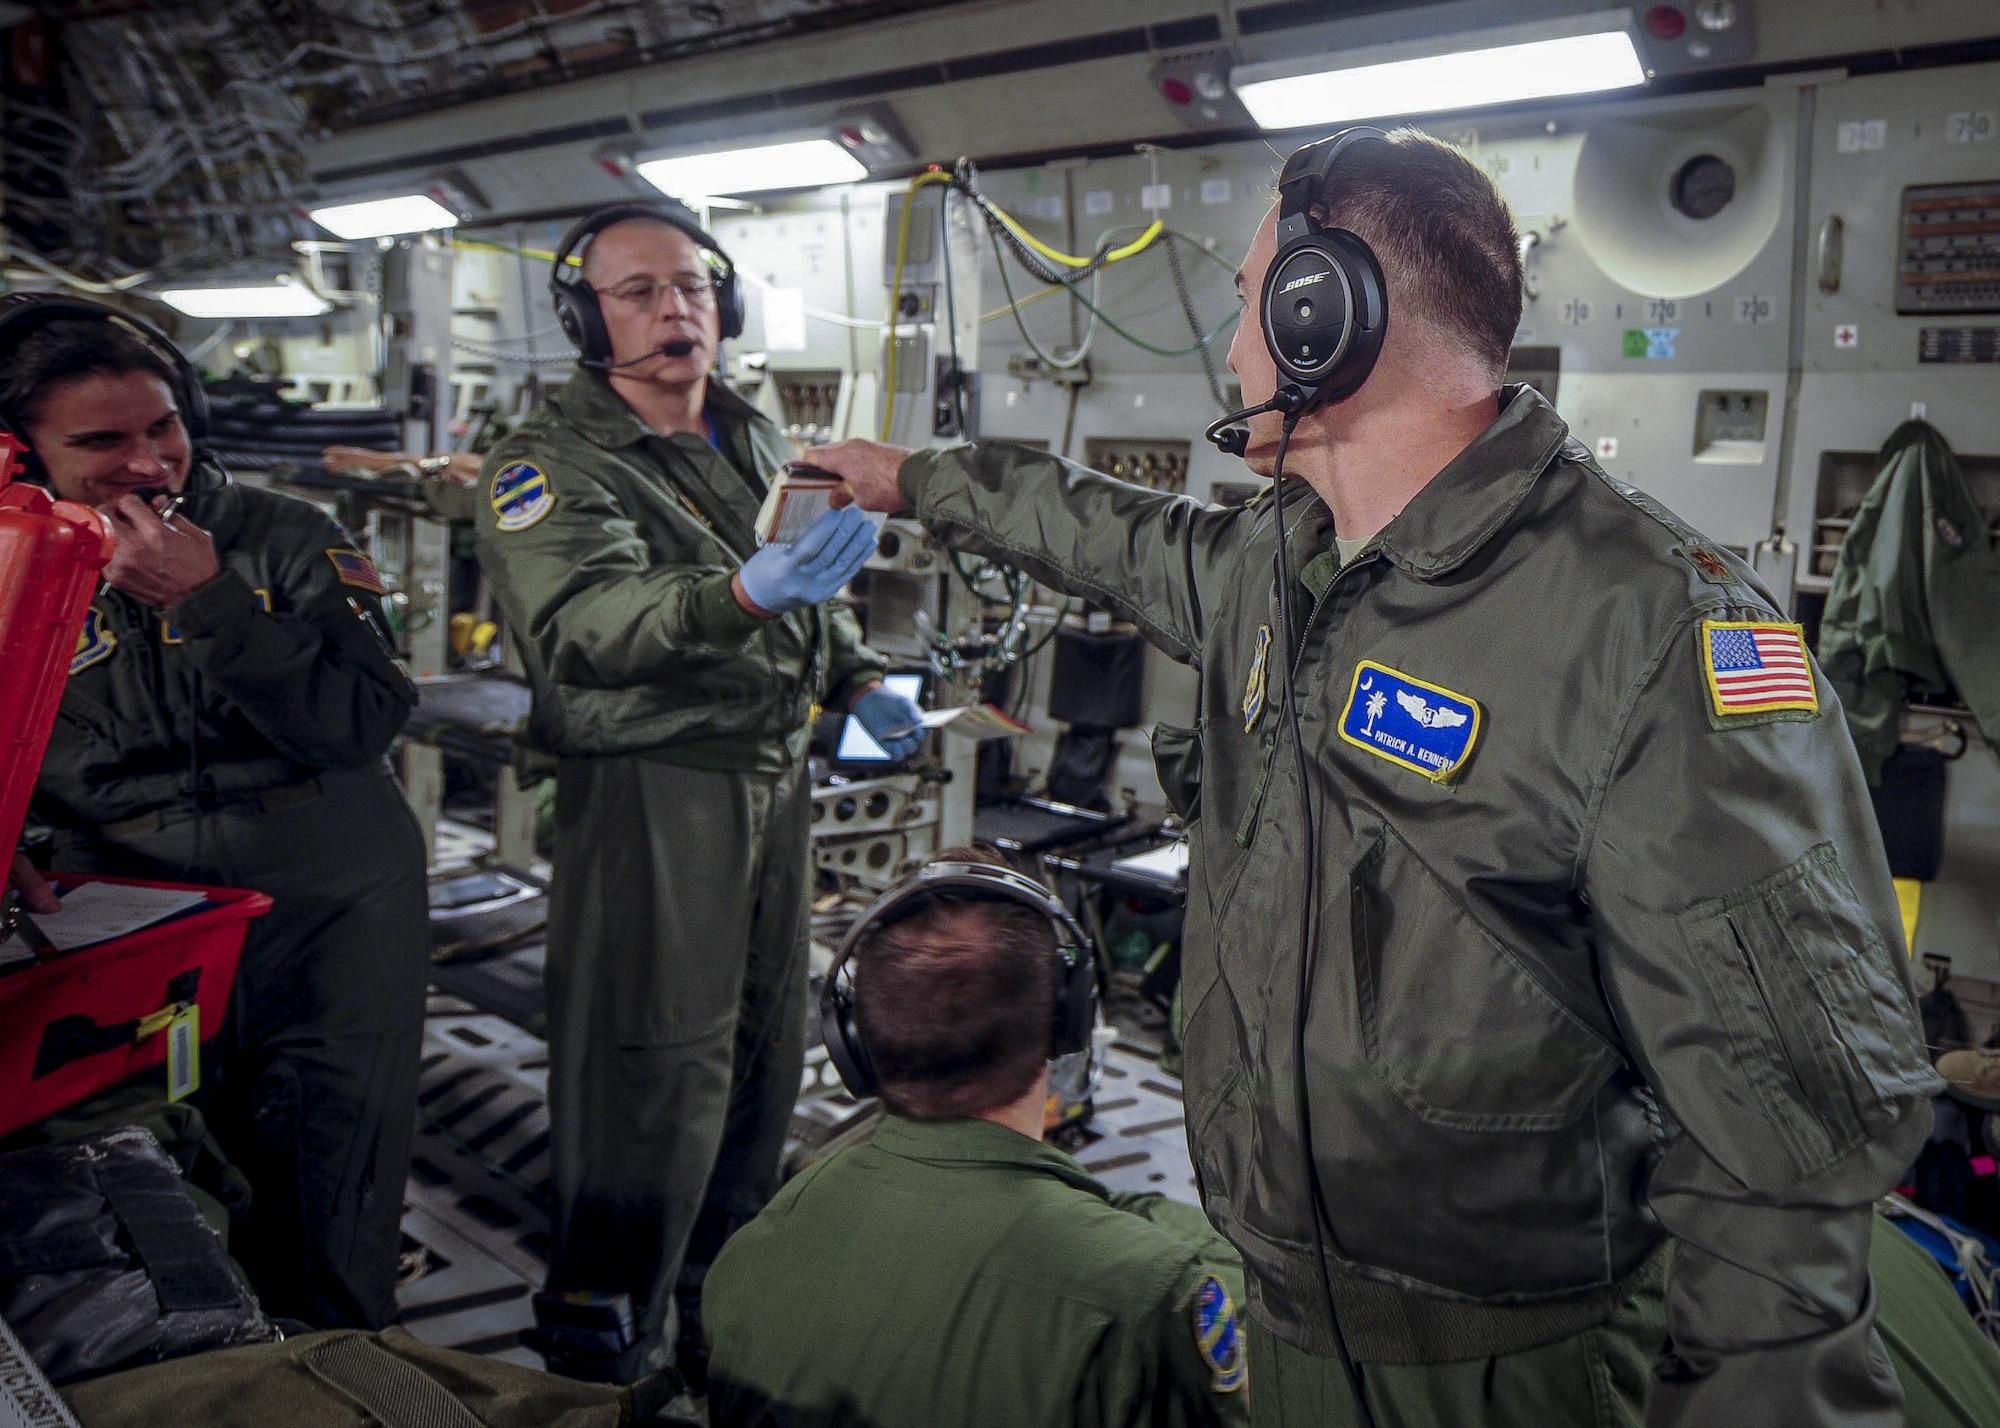 (From left) Maj. Patrick Kennedy, 315th Aeromedical Evacuation Squadron chief of standardizations and evaluations, hands a scenario card to Maj. Derek Stone, 315th AES, while conducting medical training Jan. 13, 2017, while on board a C-17 Globemaster III, bound for Ramstein Air Base, Germany. Each card contains various training emergencies for the medical professionals to overcome while in-flight. Airmen from the 315th AES are able to conduct medical training, while in conjunction with real-world operations. (U.S. Air Force photo by Senior Airman Tom Brading)